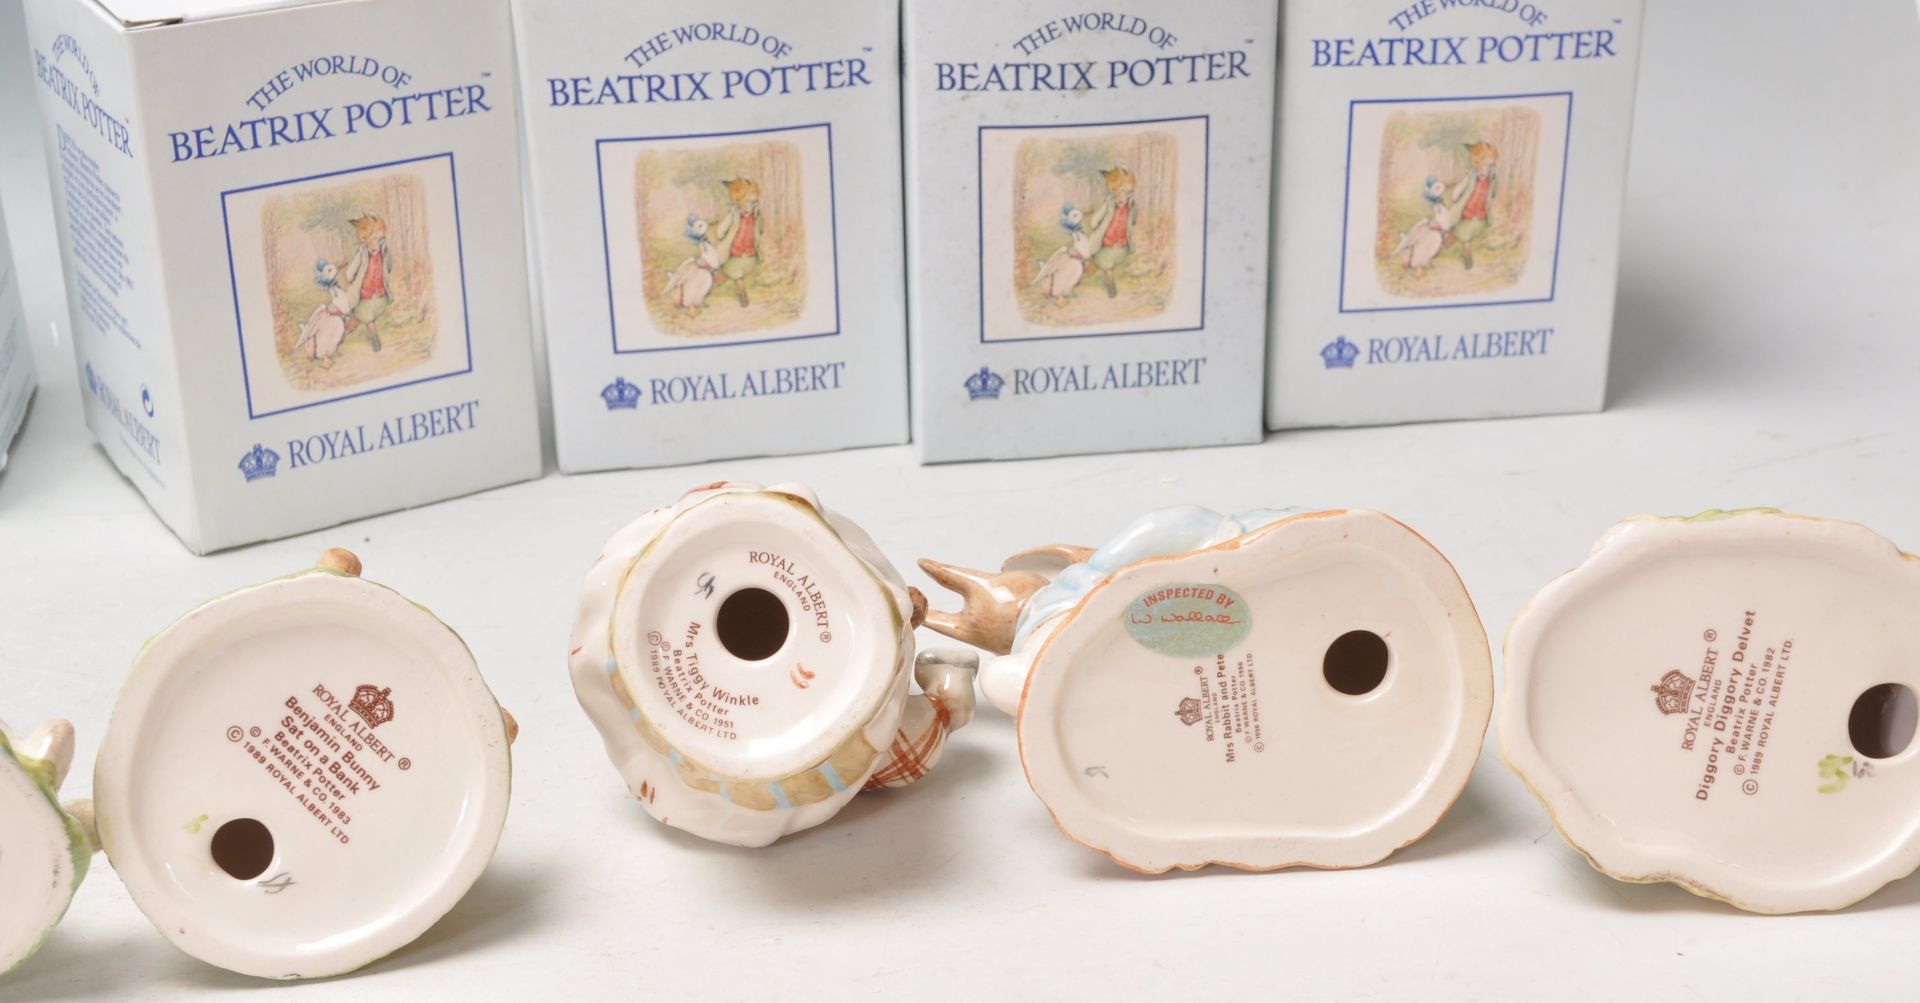 A good collection of ten Royal Albert ceramic figures in 'The World Of Beatrix Potter Collection' to - Bild 8 aus 8